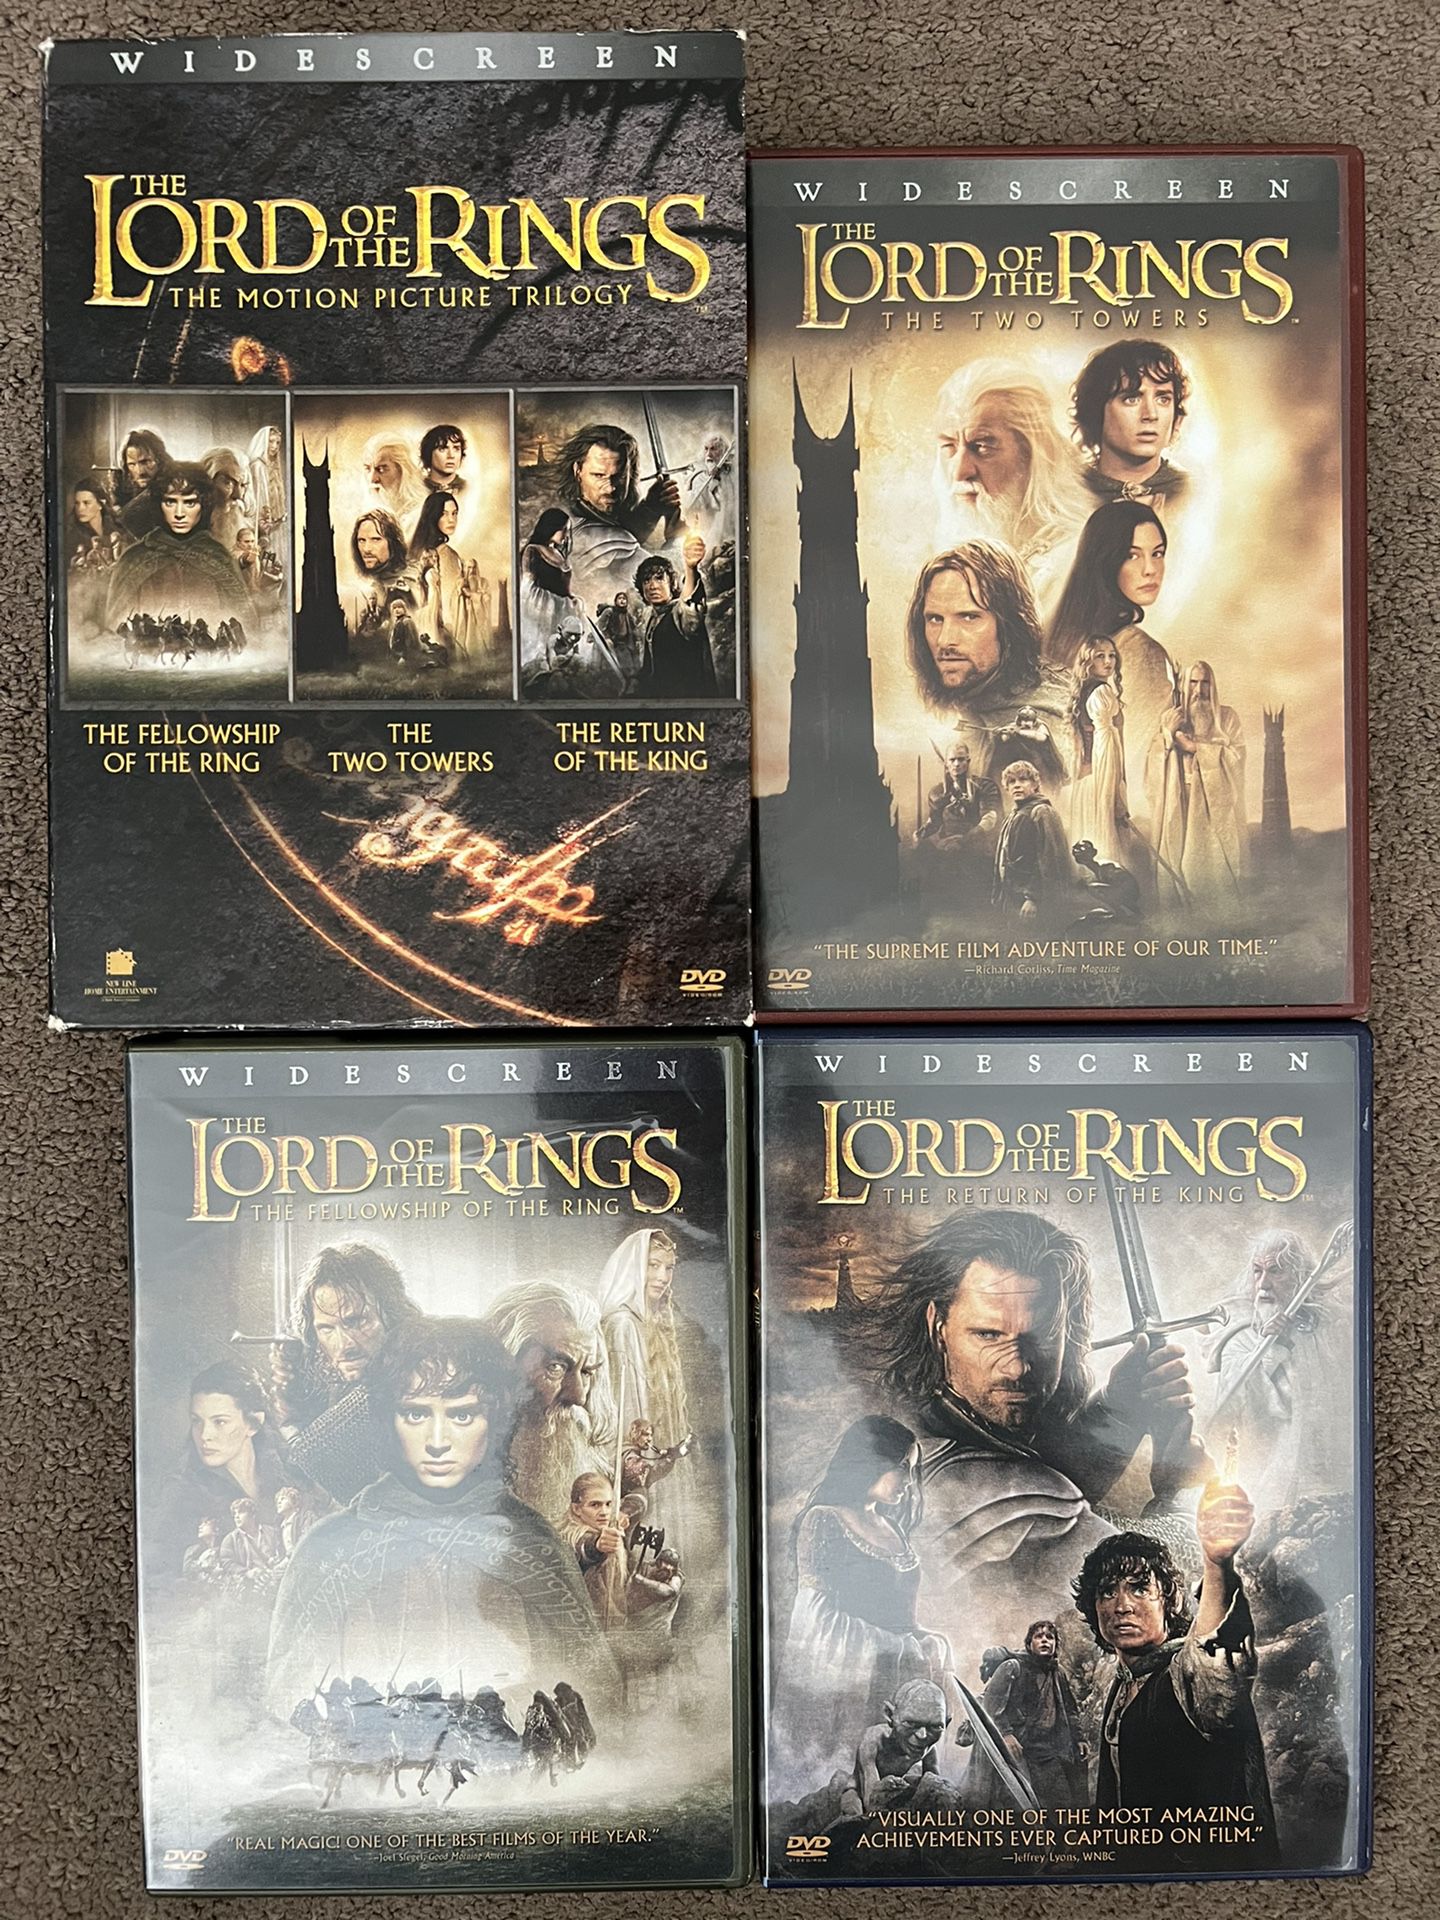 The Lord of the Rings: The Motion Picture Trilogy (DVD, 2004, 6-Disc Set).